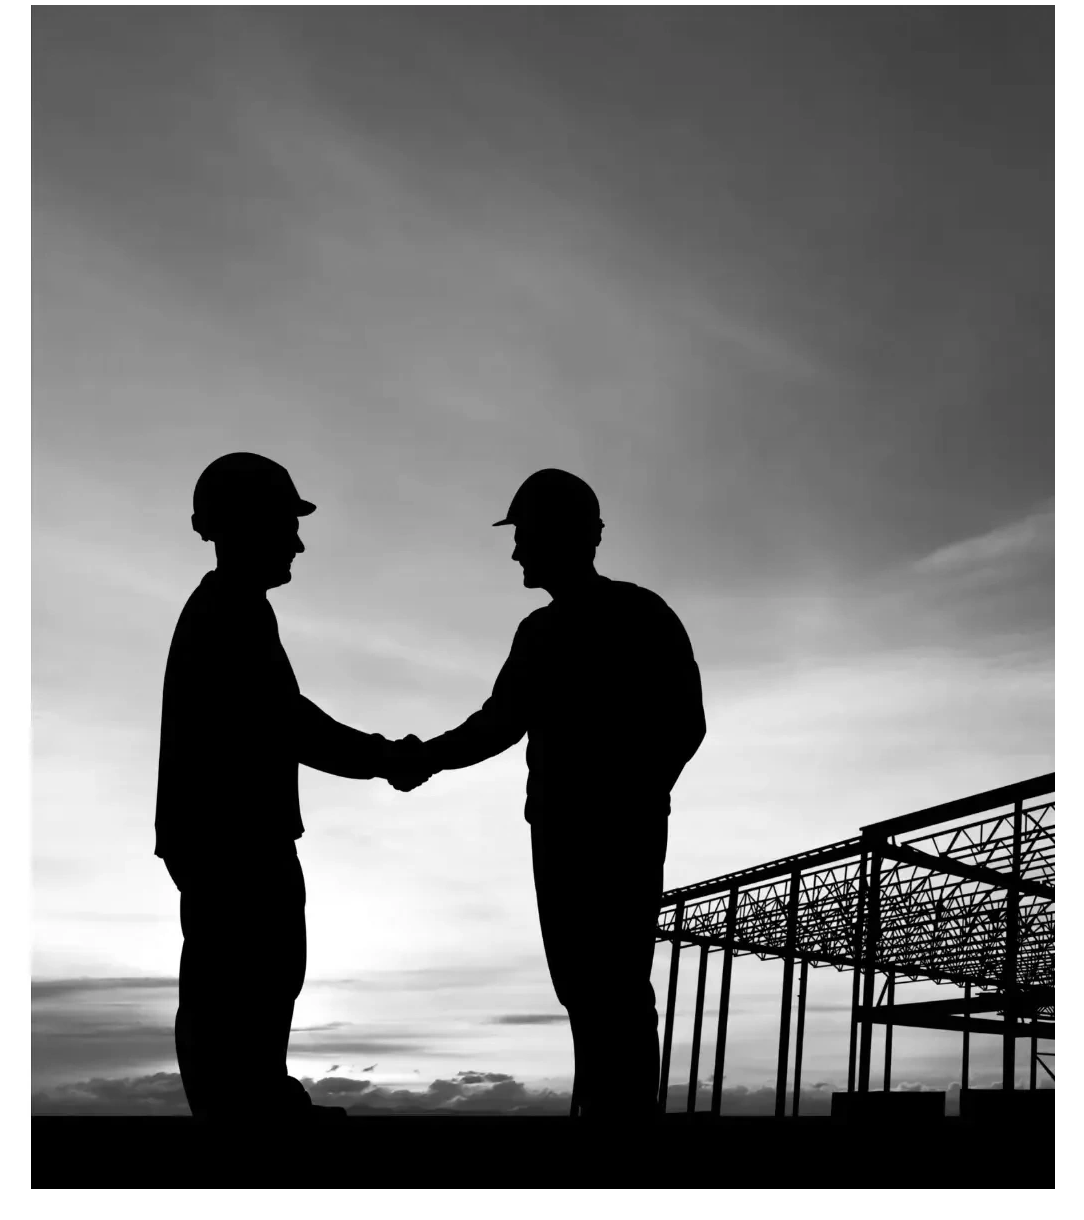 Construction workers sealing a deal with a handshake at a job site.